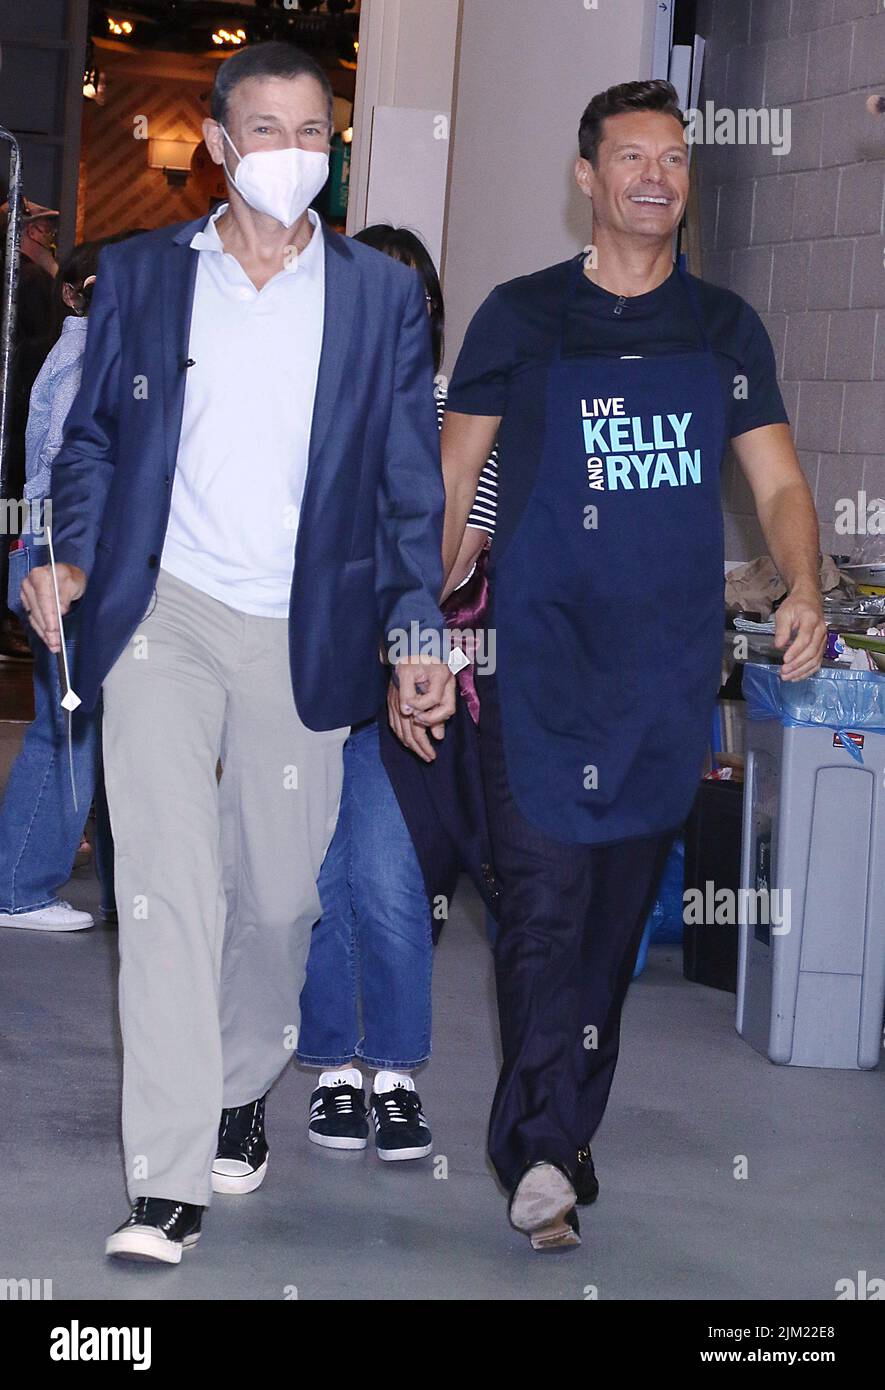 New York, NY, USA. 03rd ago 2022. Michael Gelman e Ryan Seacrest sul set di Live with Kelly & Ryan's Live's Foodfluencer Friday Faceoff a New York il 03 agosto 2022. Credit: RW/Media Punch/Alamy Live News Foto Stock